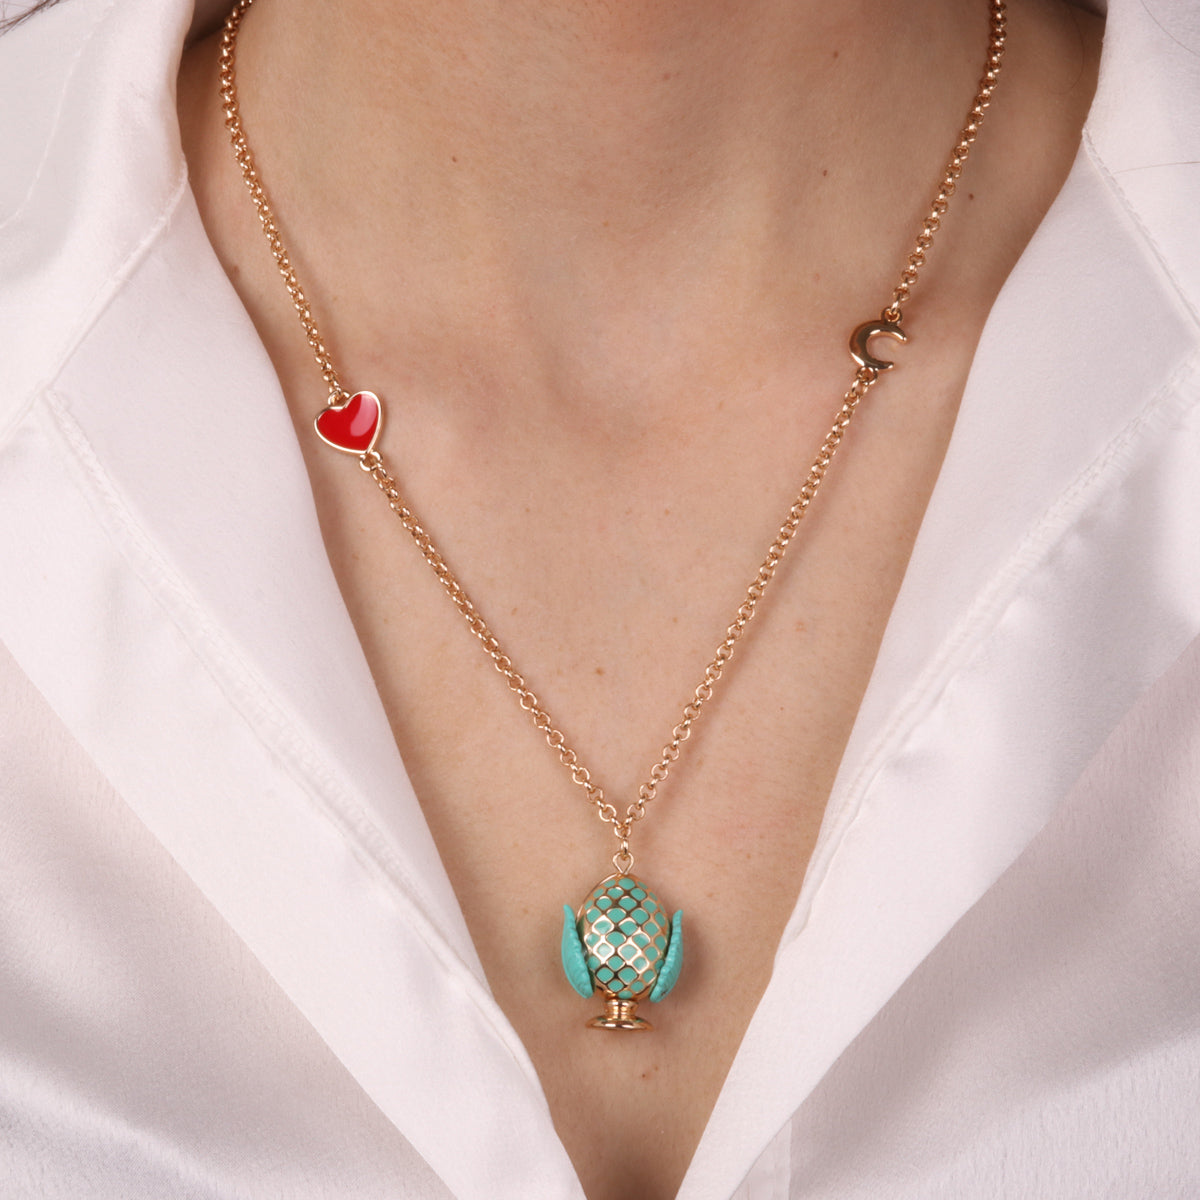 Metal necklace with Turquoise Pugliese pumo